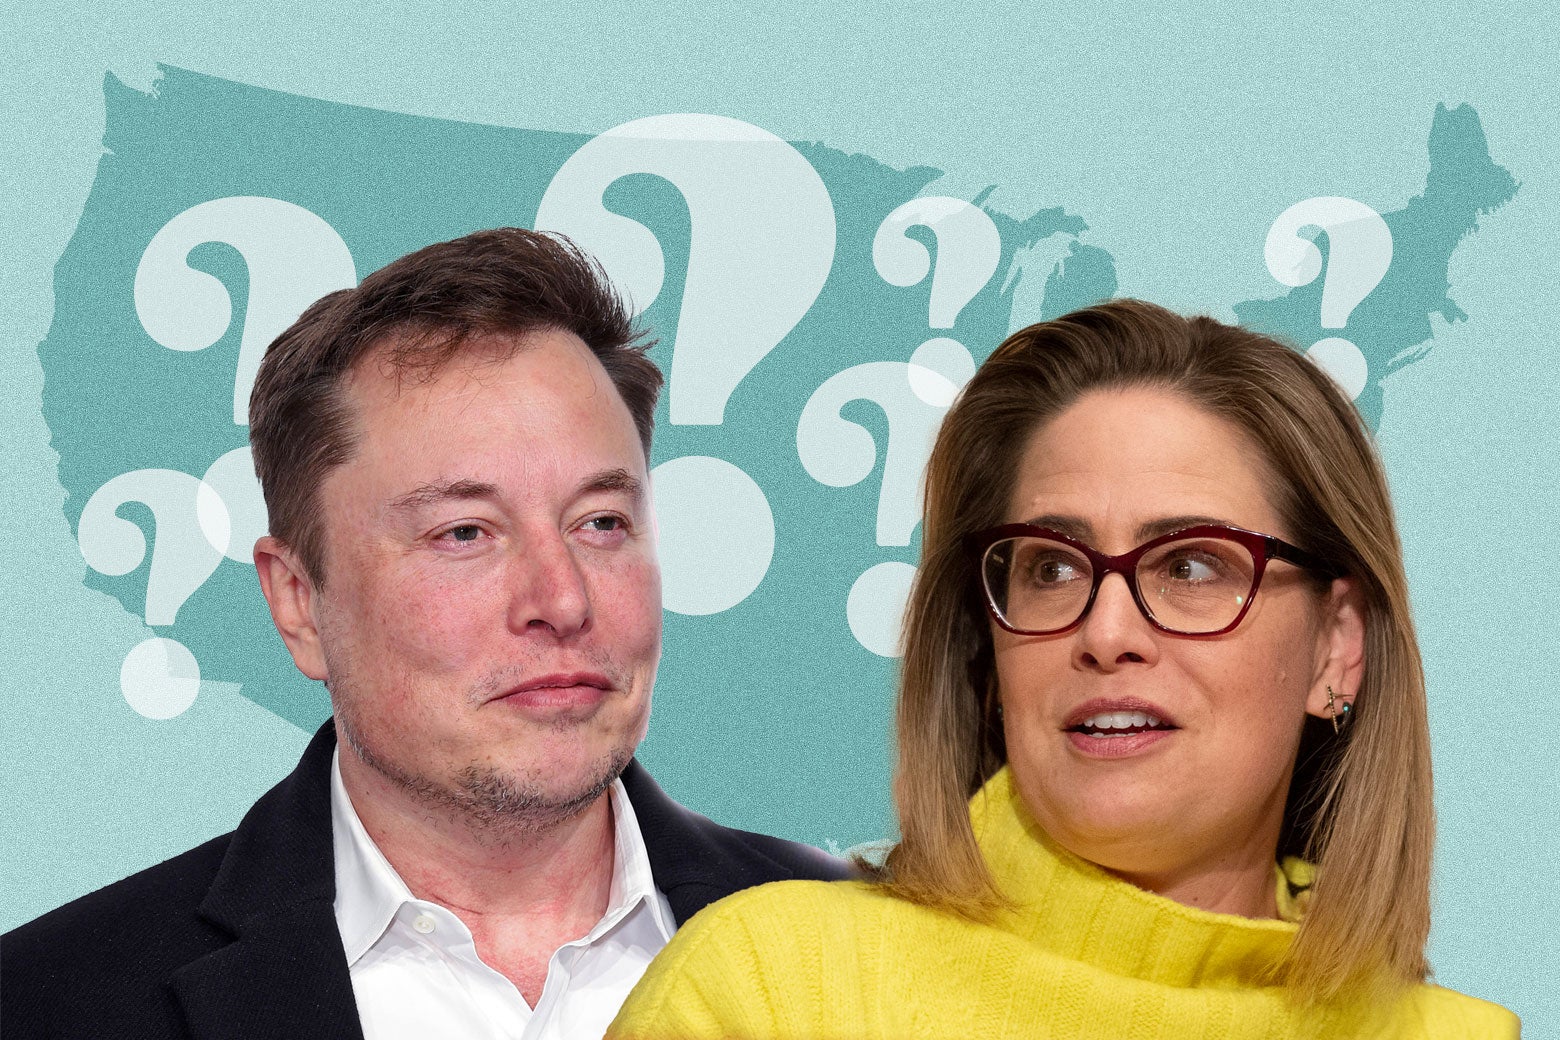 Elon Musk and Kyrsten Sinema's cut-out head shots are seen against a backdrop of a blue United States map covered in question marks. Both Musk and Sinema are wearing goofy expressions.